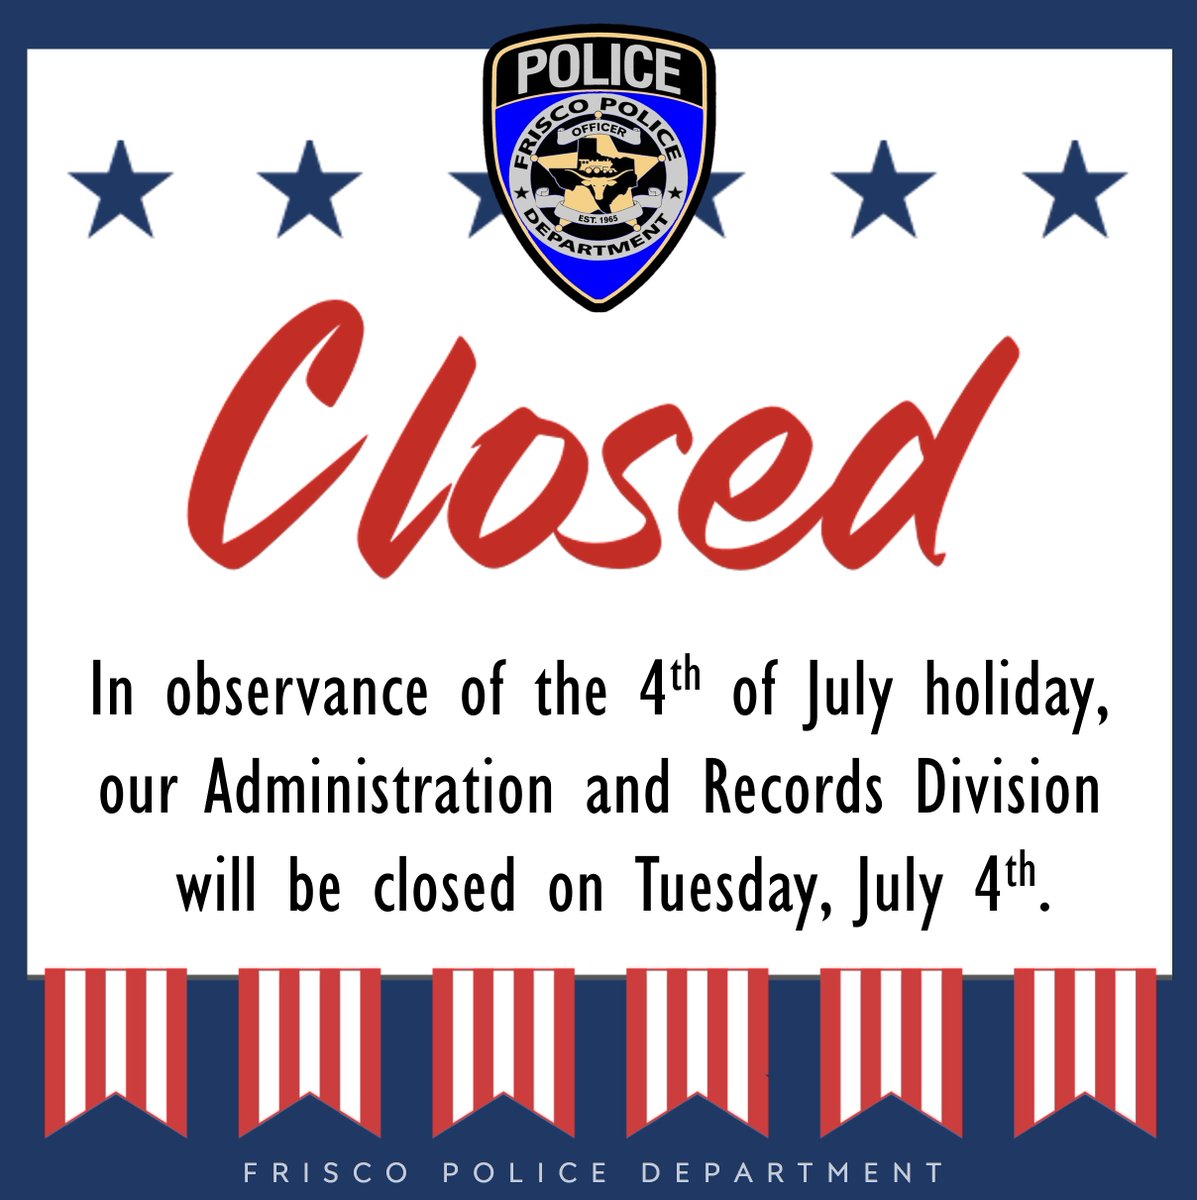 In observance of the 4th of July holiday, our Administration and Records Division will be closed on Tuesday, July 4th.

As always, our PD family in Patrol, Dispatch, and Detention are on shift 24/7. #CallUsIfYouNeedUs.